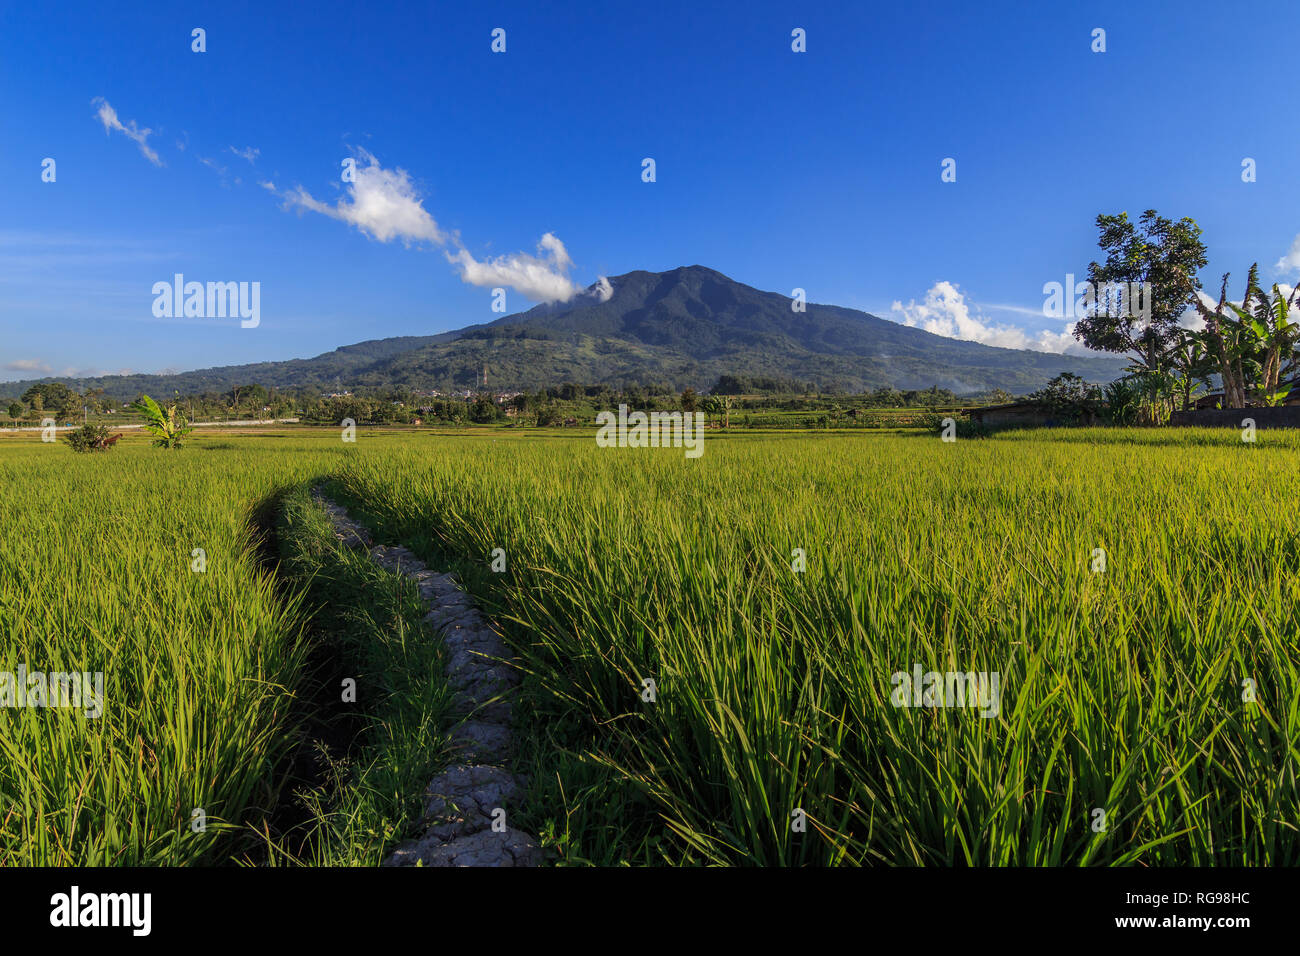 Paddy fields in front of Singgalang Mountain, West Sumatra, Indonesia Stock Photo